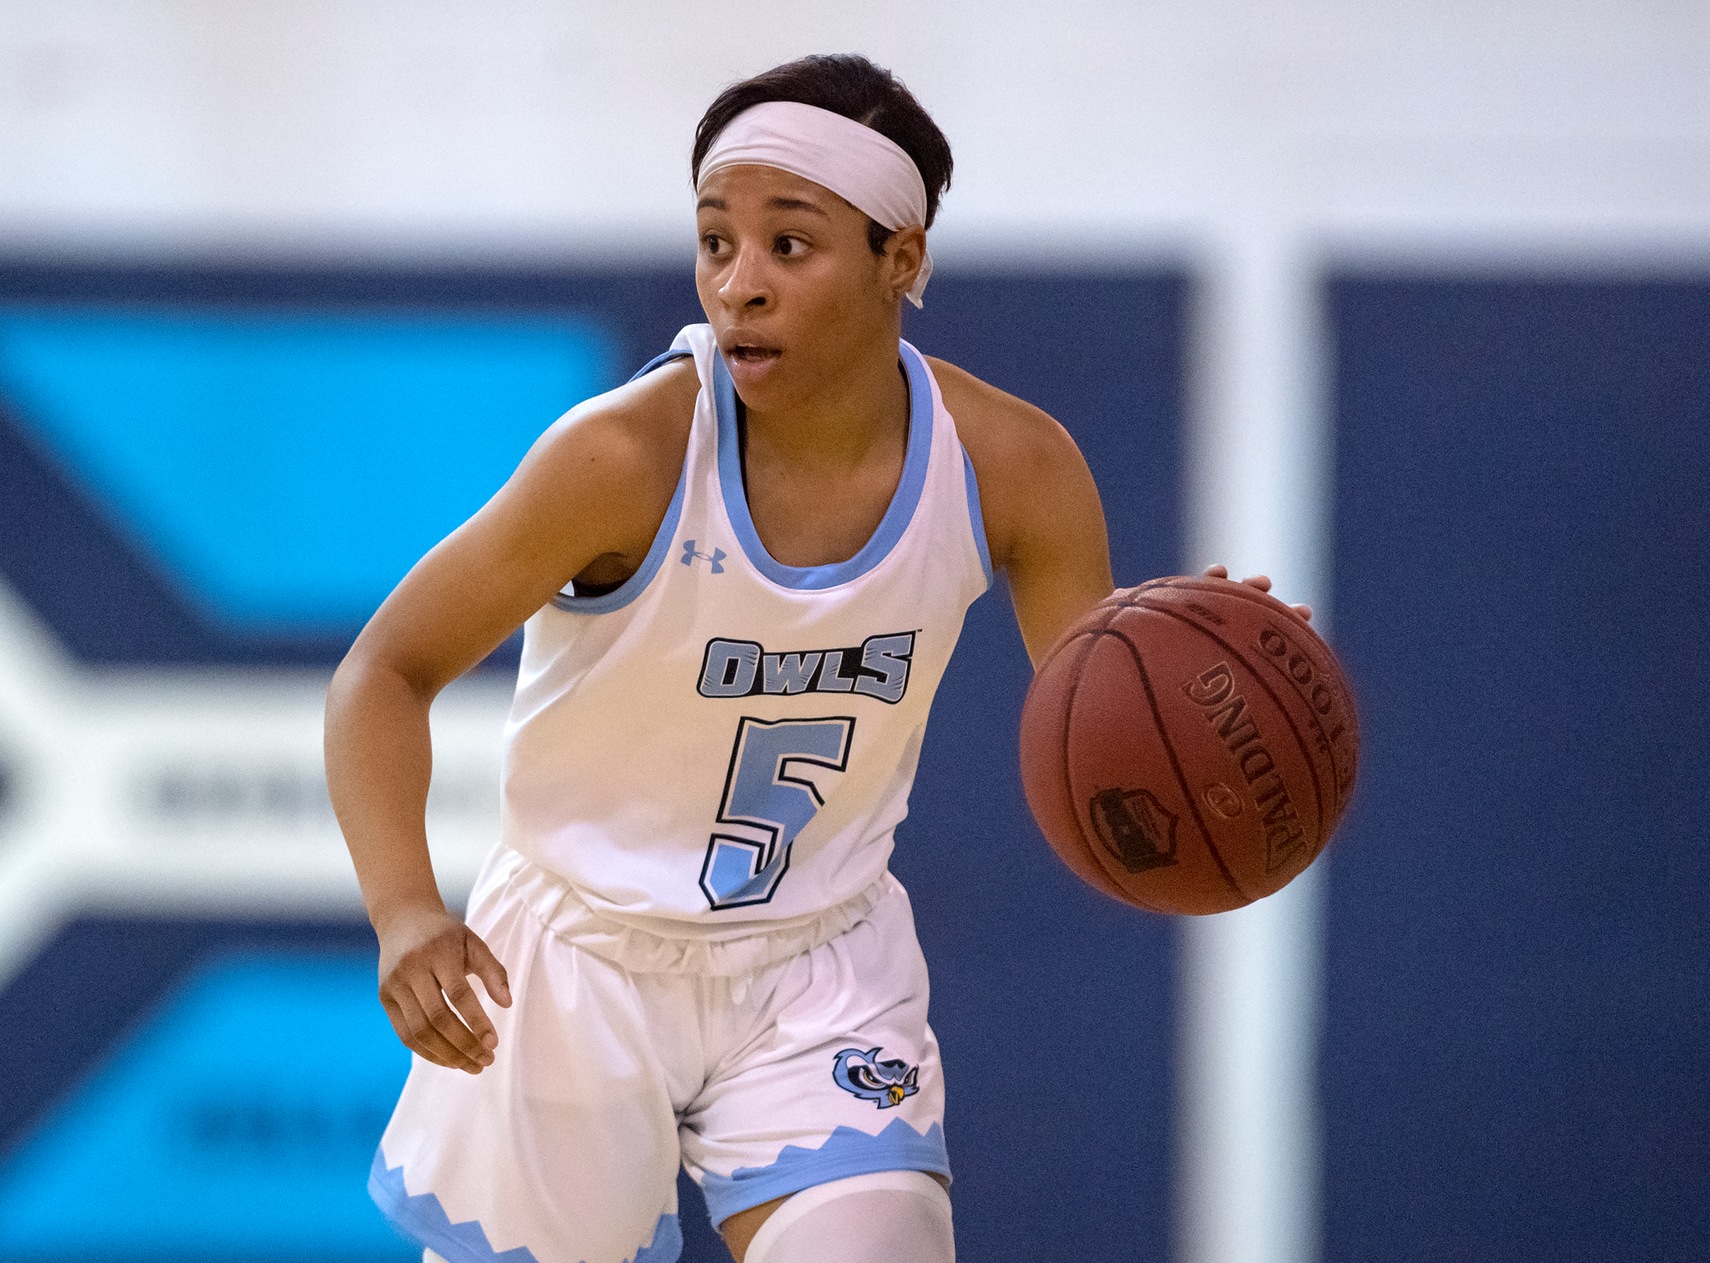 High Scoring From People, Garvin Not Enough As Owls Fall To CCBC Catonsville